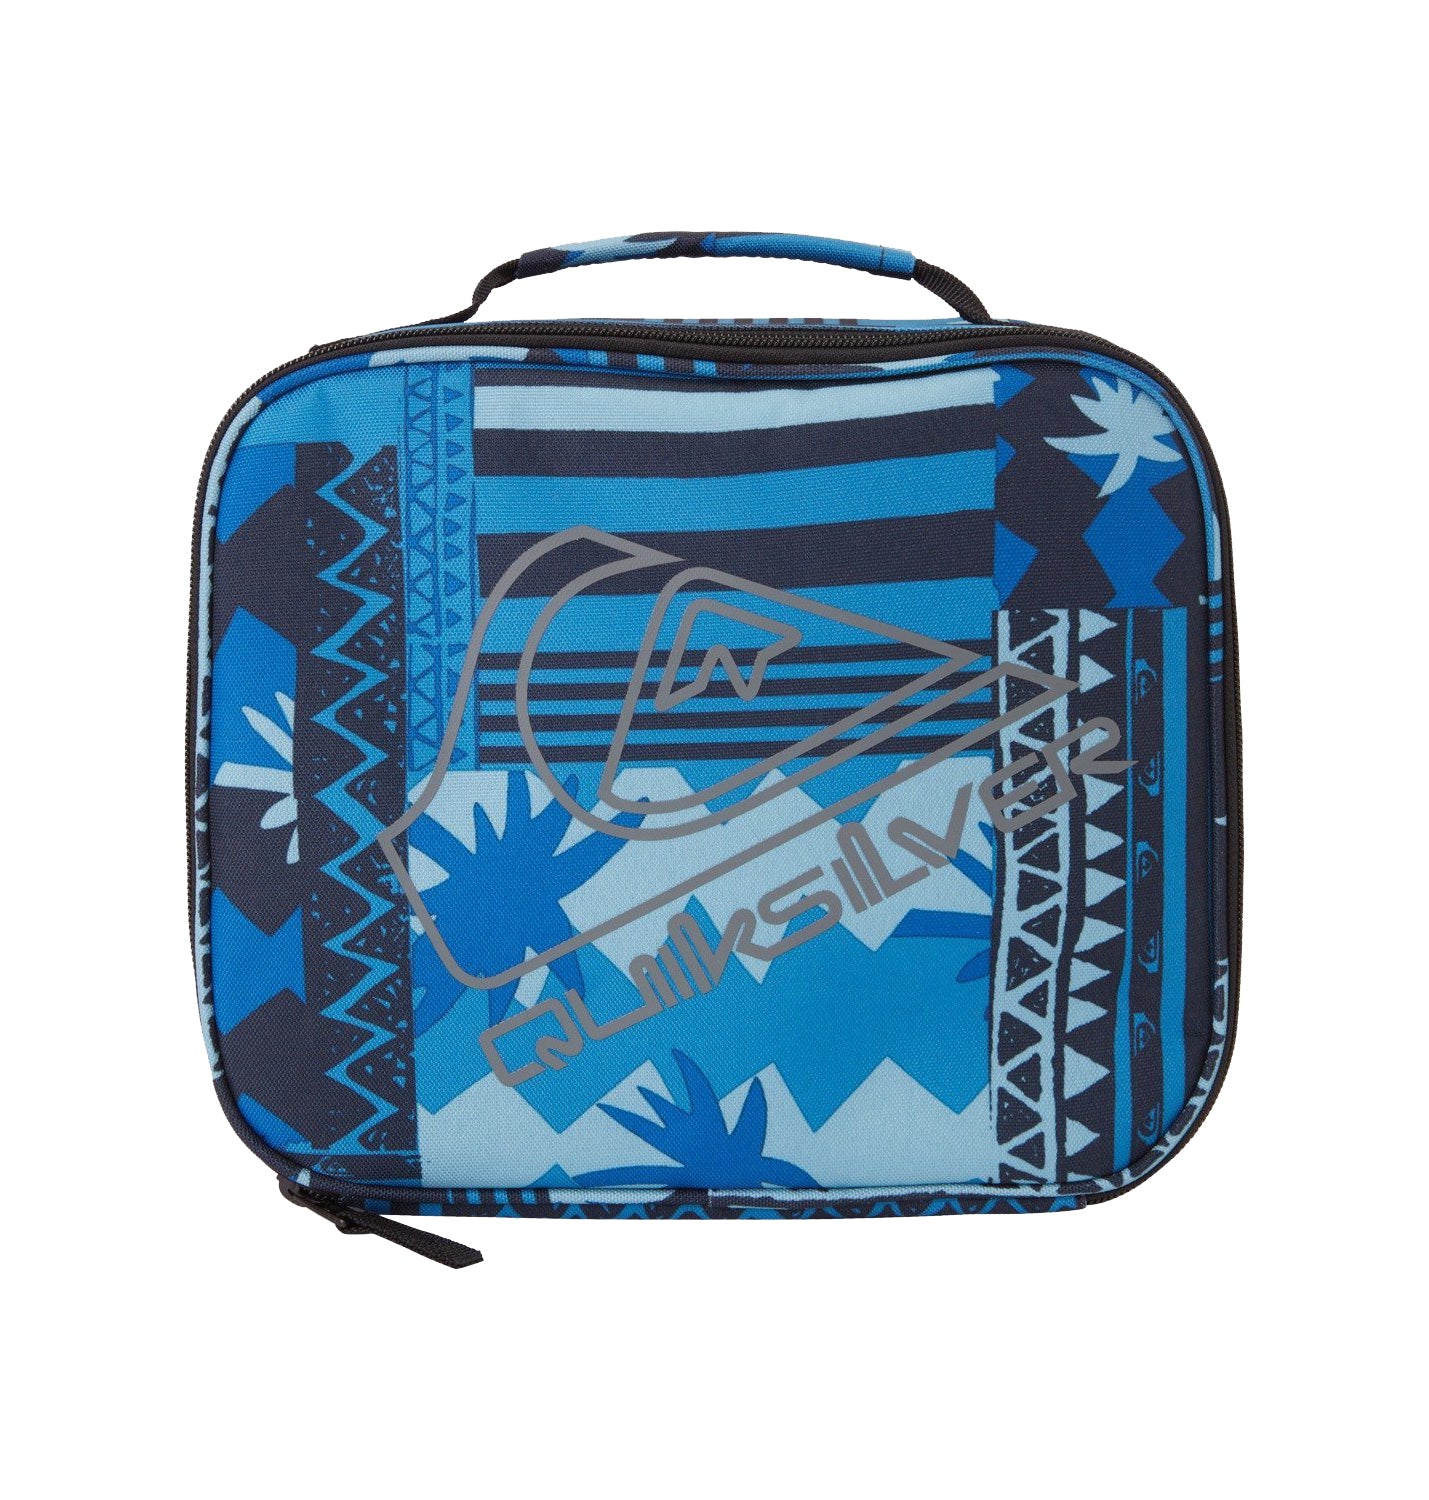 Quiksilver Boys 8-16 Lunch Boxer Lunch Box